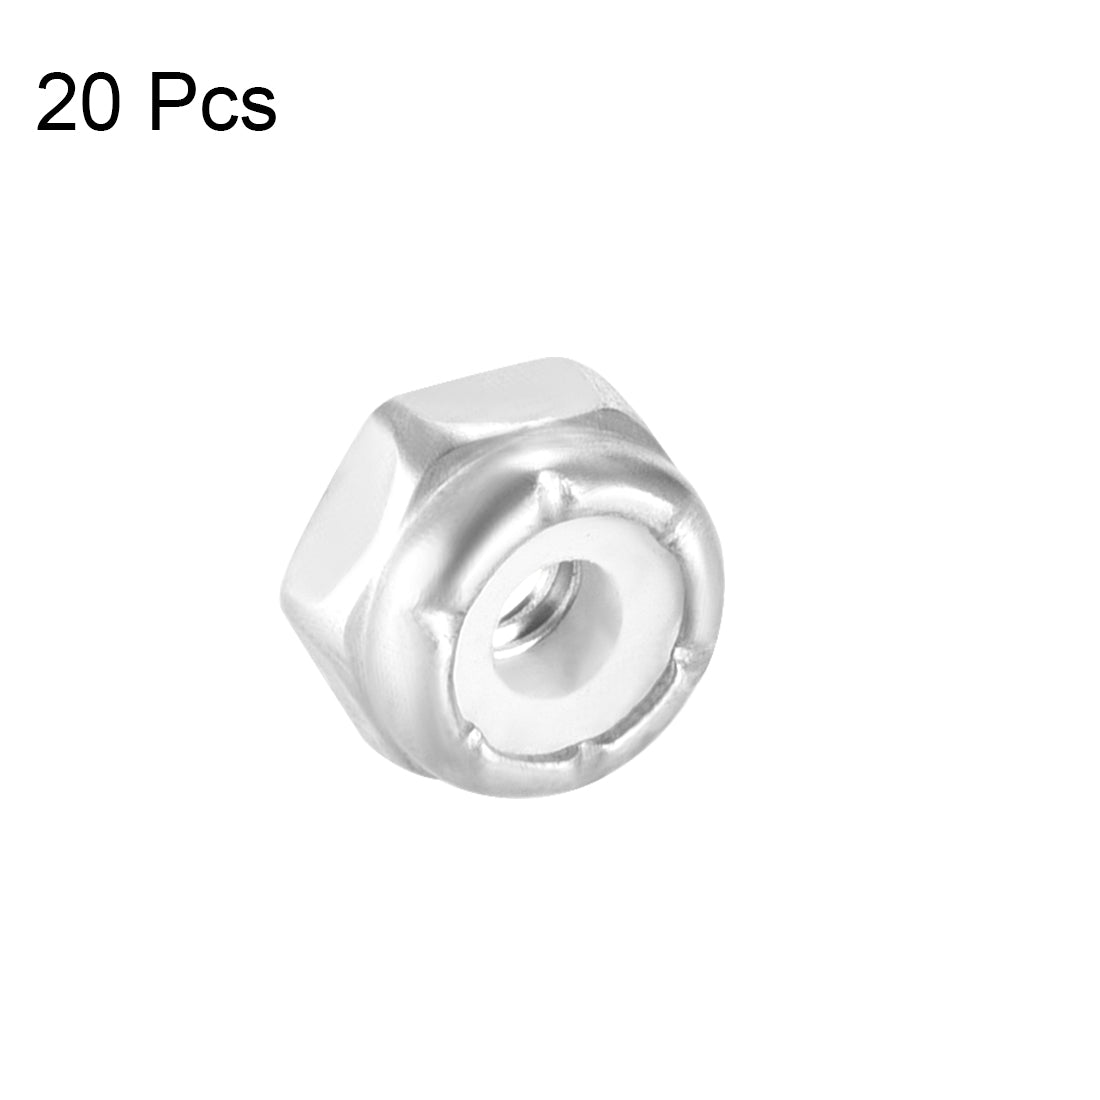 uxcell Uxcell 4#-40 Nylon Insert Hex Lock Nuts, 304 Stainless Steel, Plain Finish, 20 Pcs